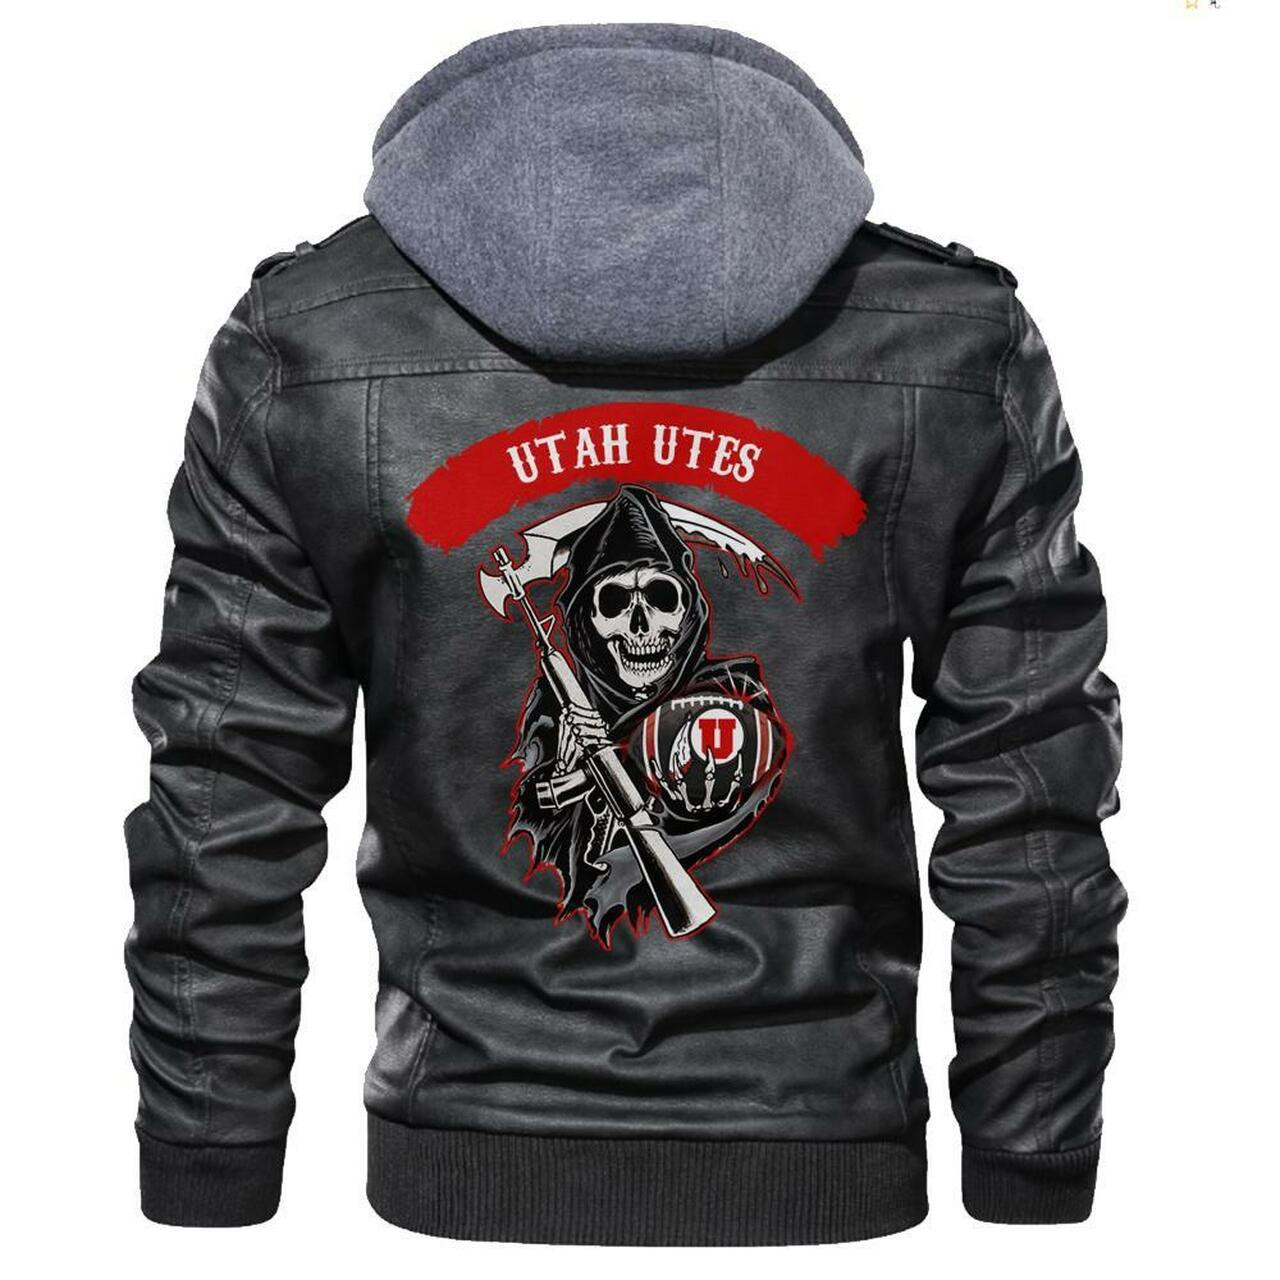 Our store has all of the latest leather jacket 81